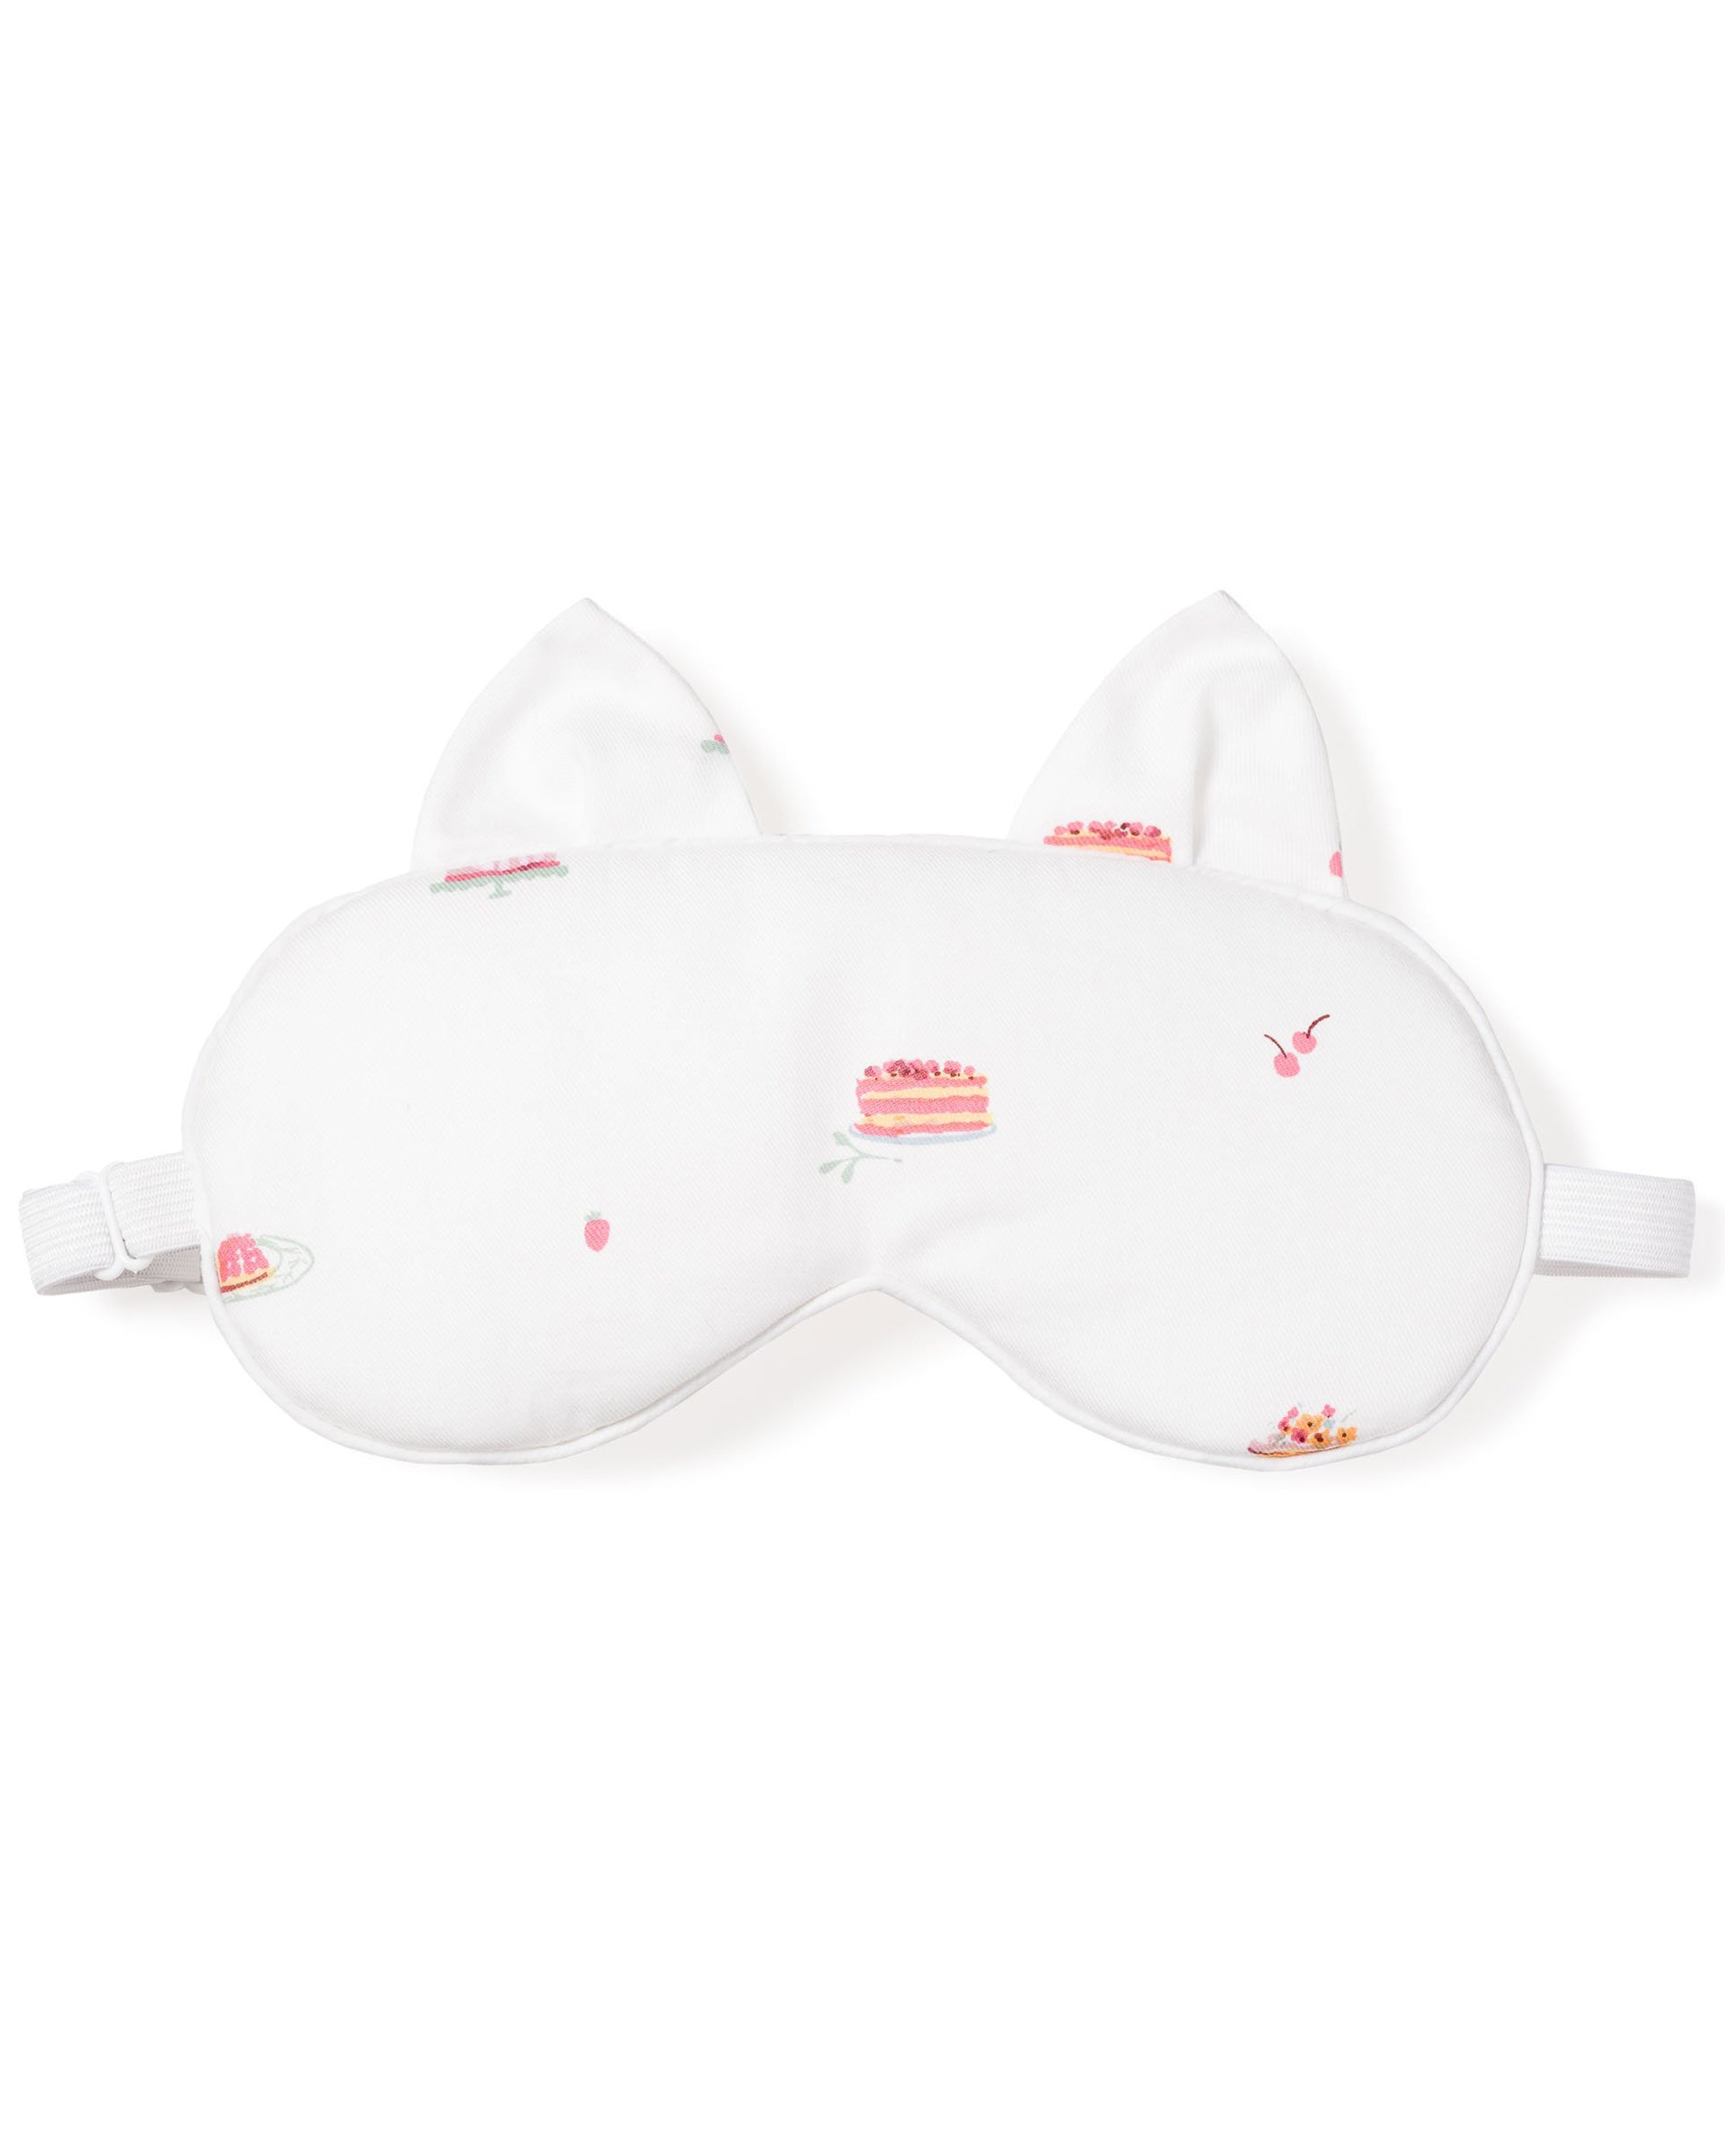 Adult's Kitty Sleep Mask in Desserts